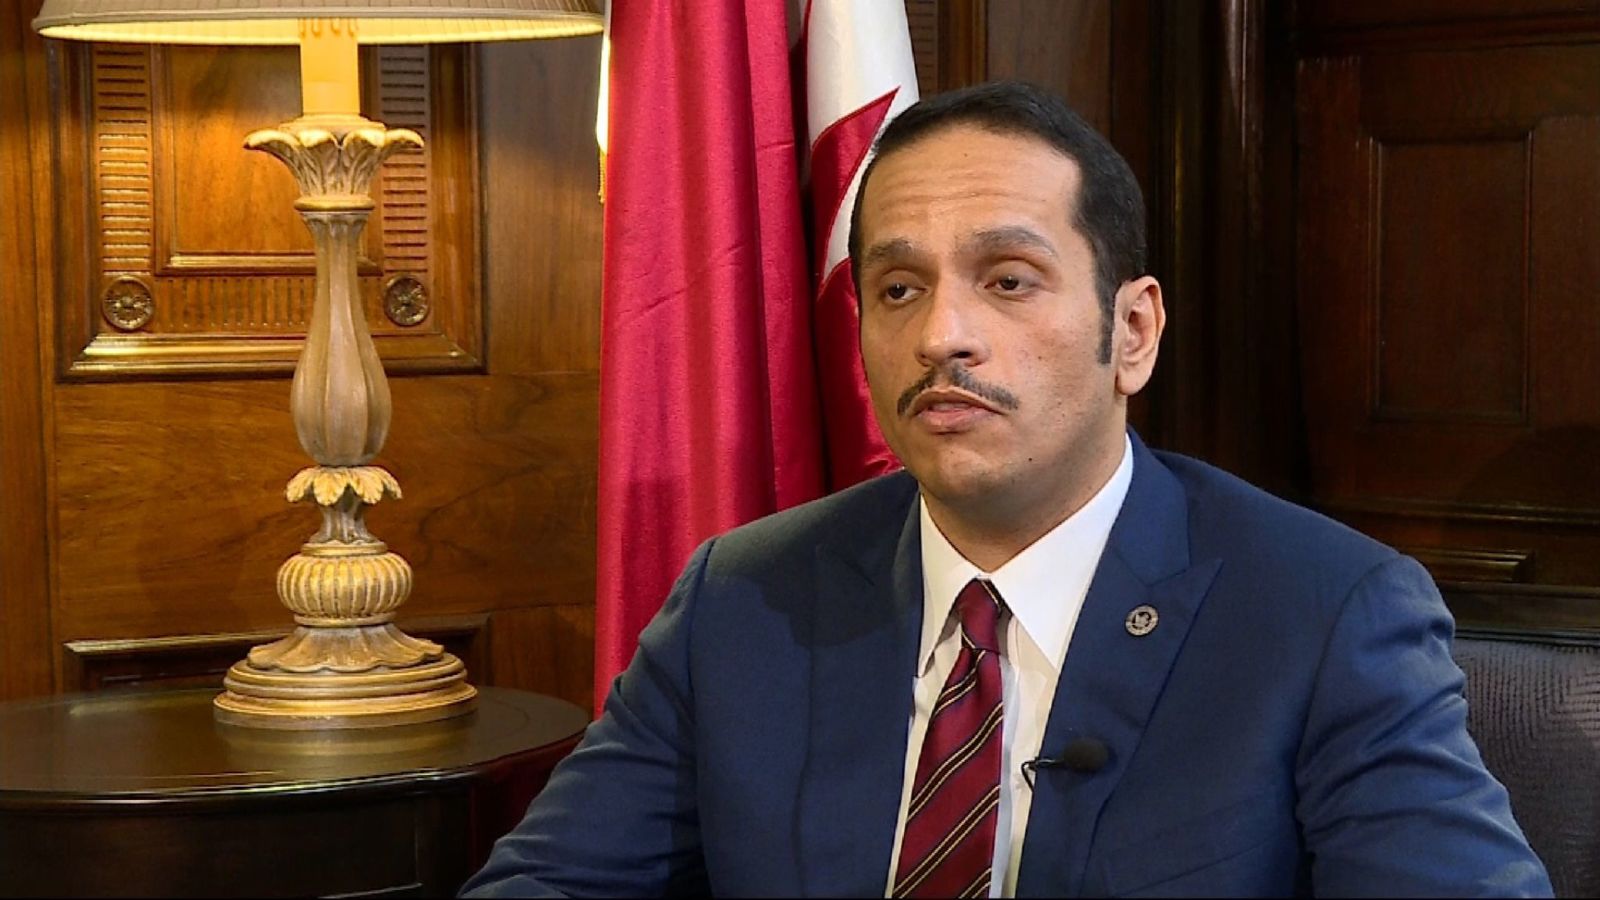 Mohammed Al-Thani says Qatar is a force for stability in the Middle East